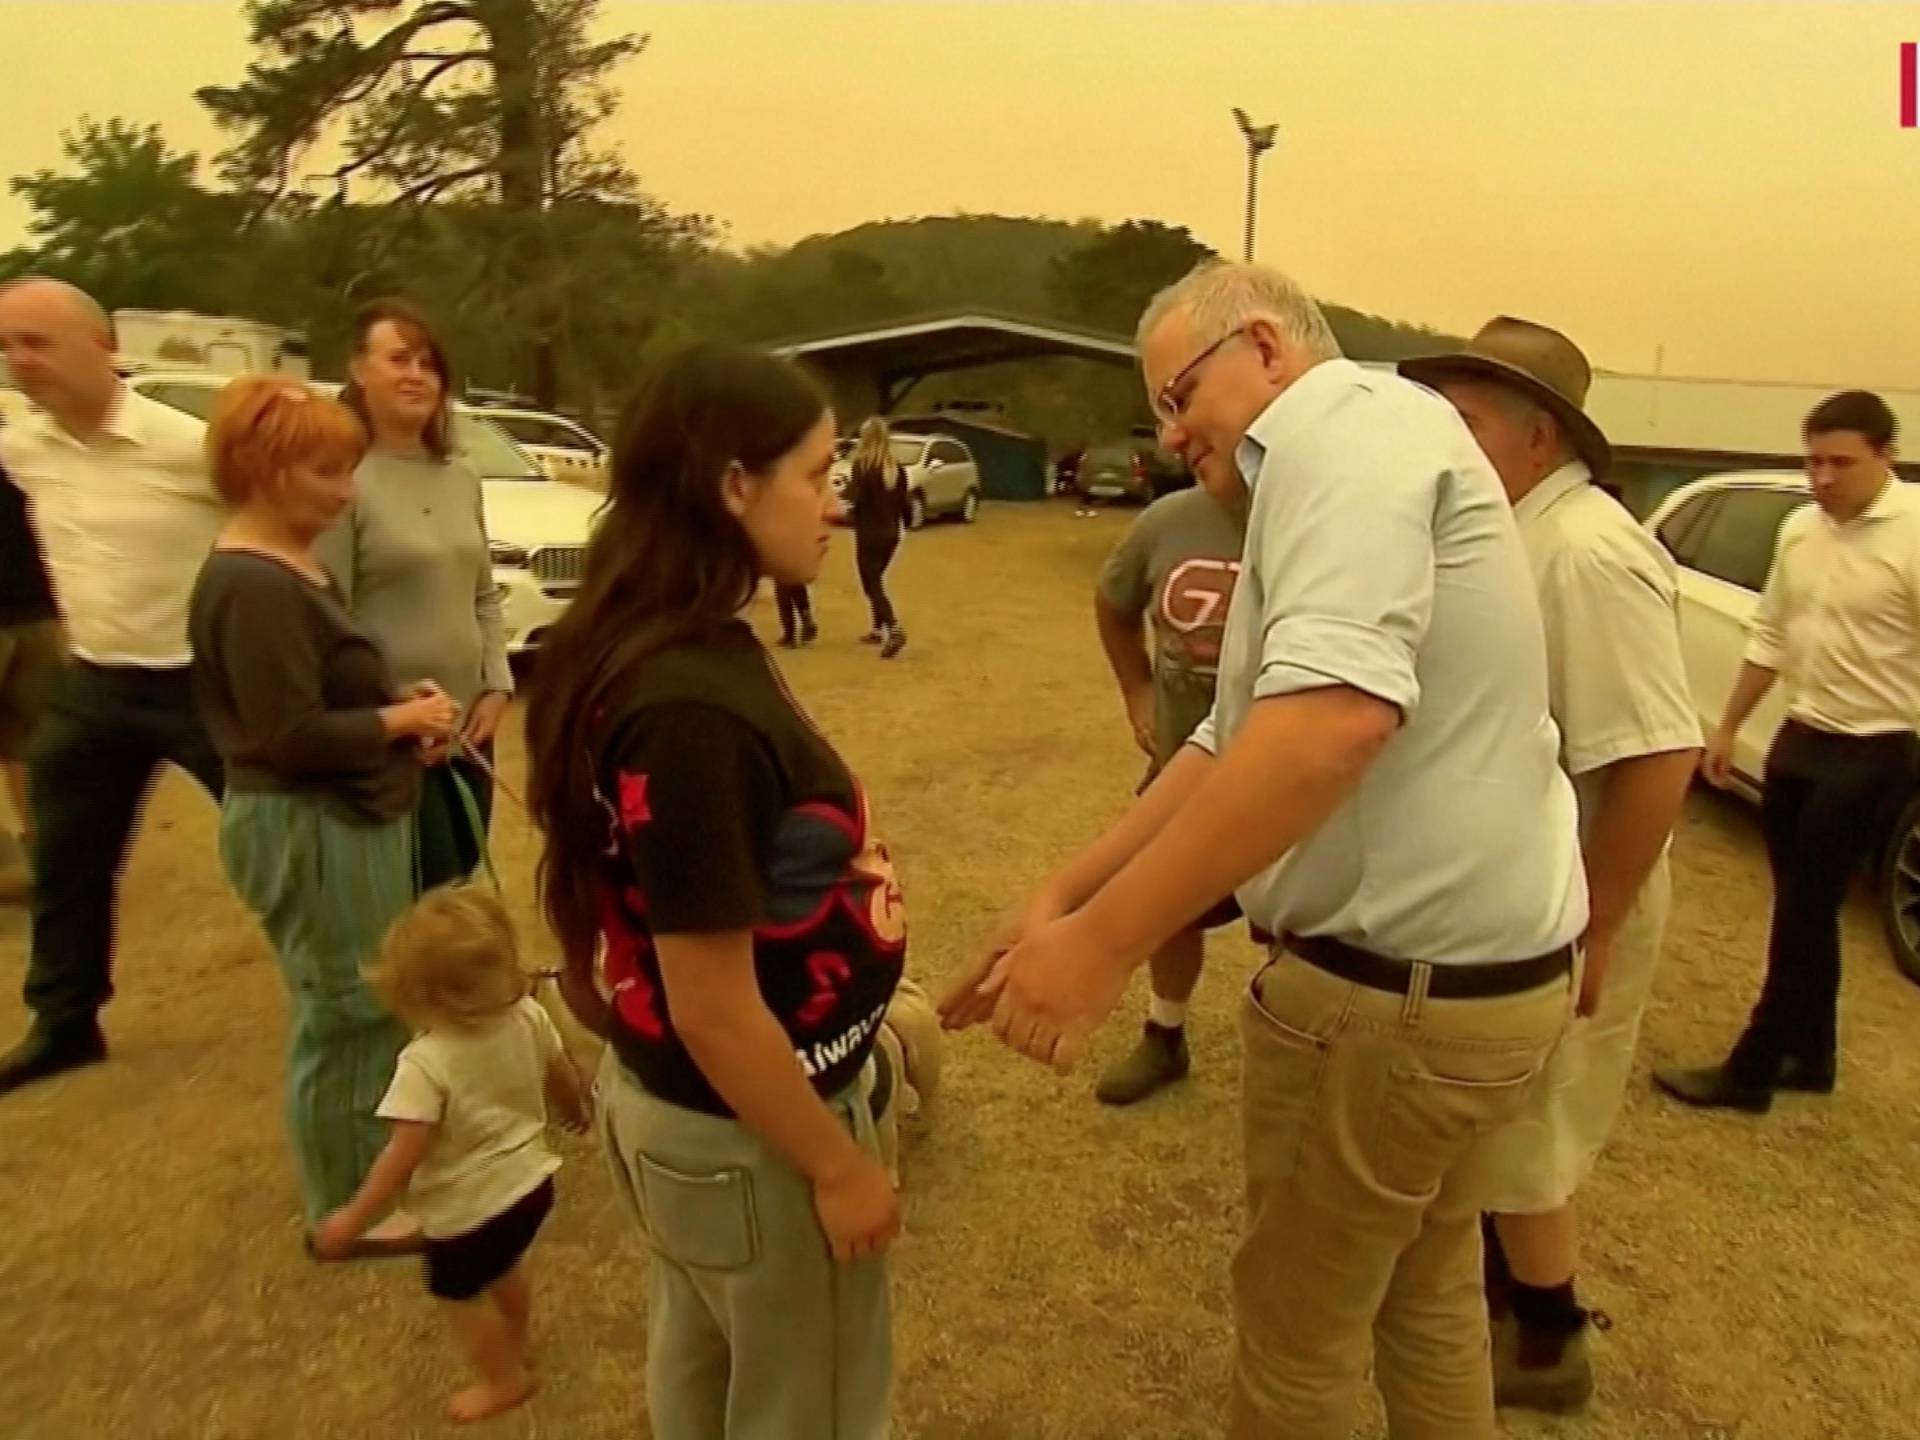 Australia's Prime Minister Scott Morrison attempts to shake a resident's hand during a visit to the bushfire-stricken town of Cobargo